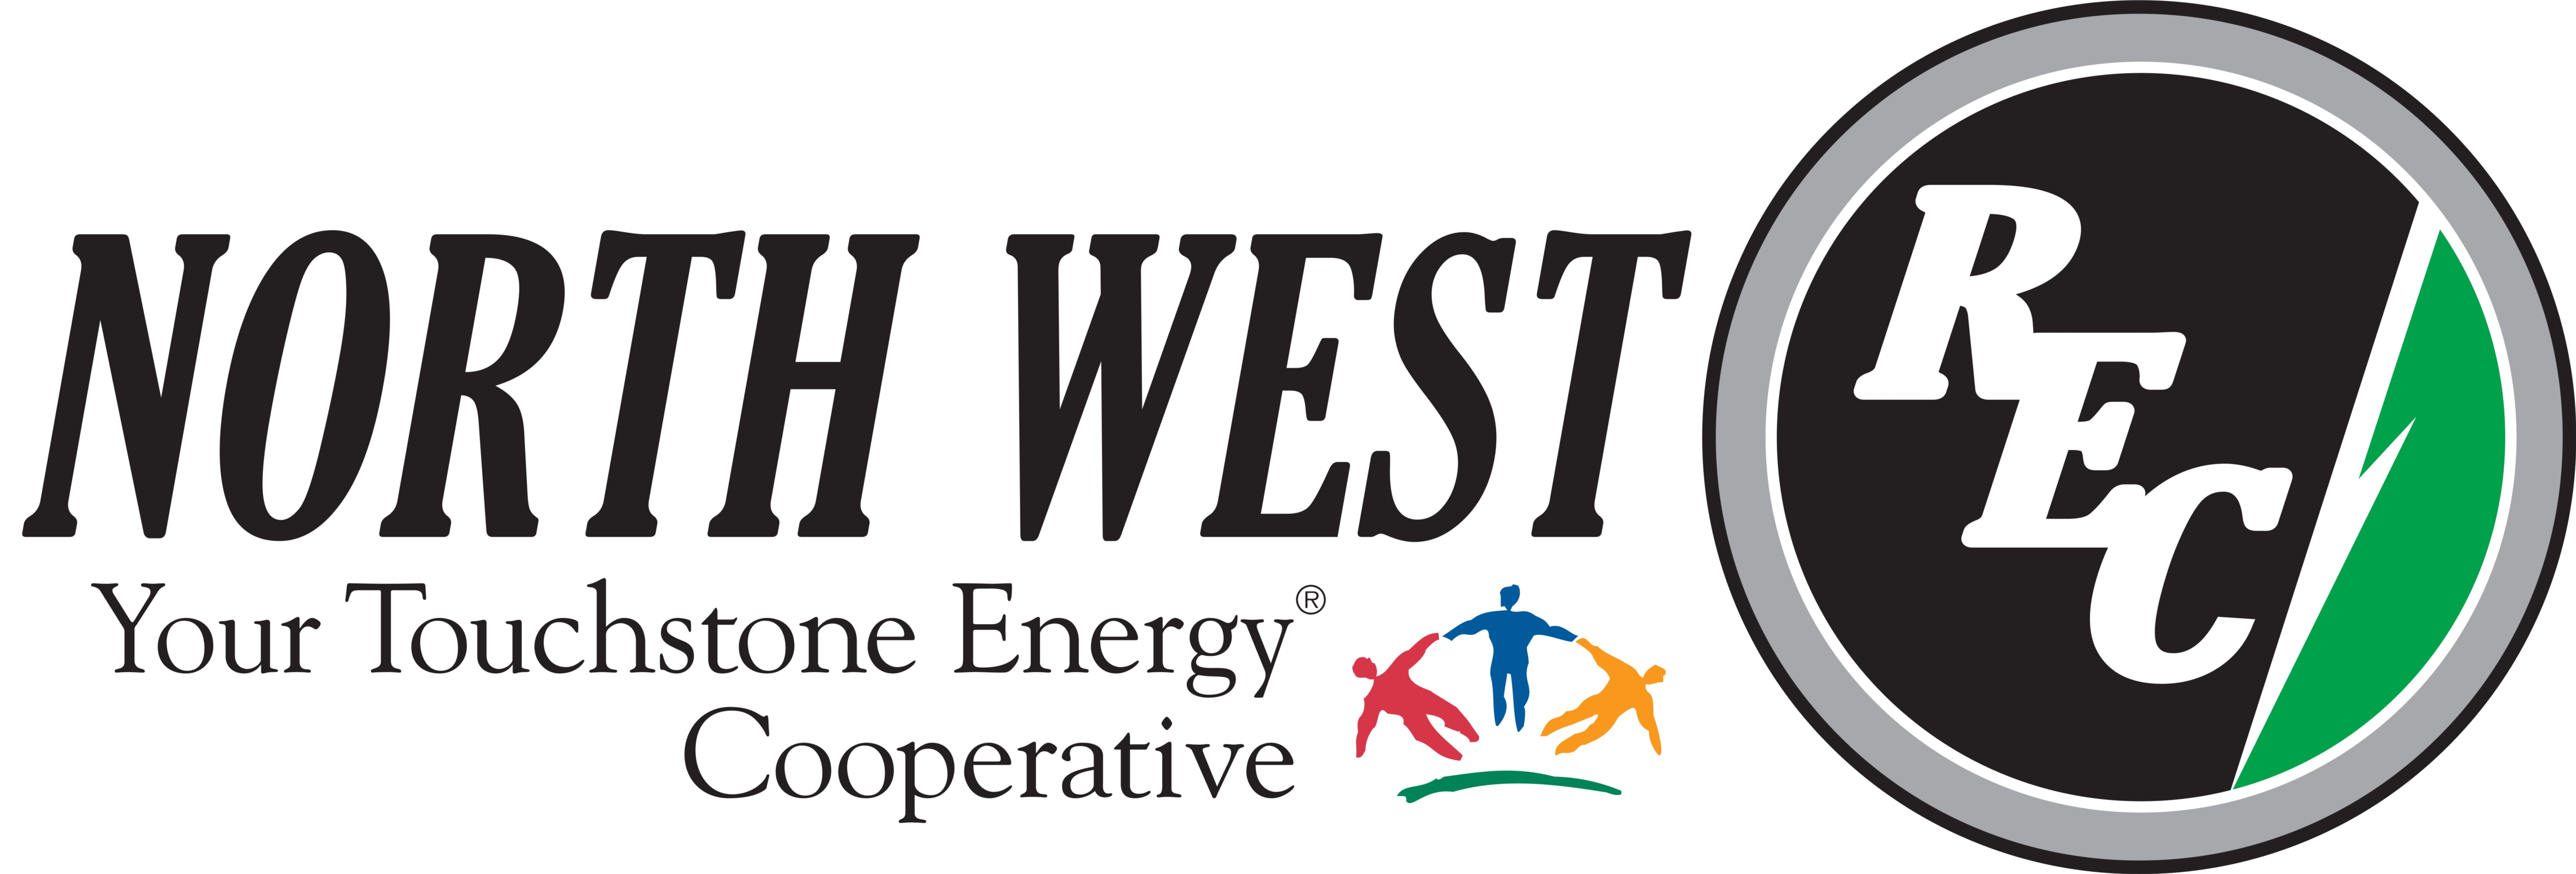 North West Rural Electric Cooperative logo